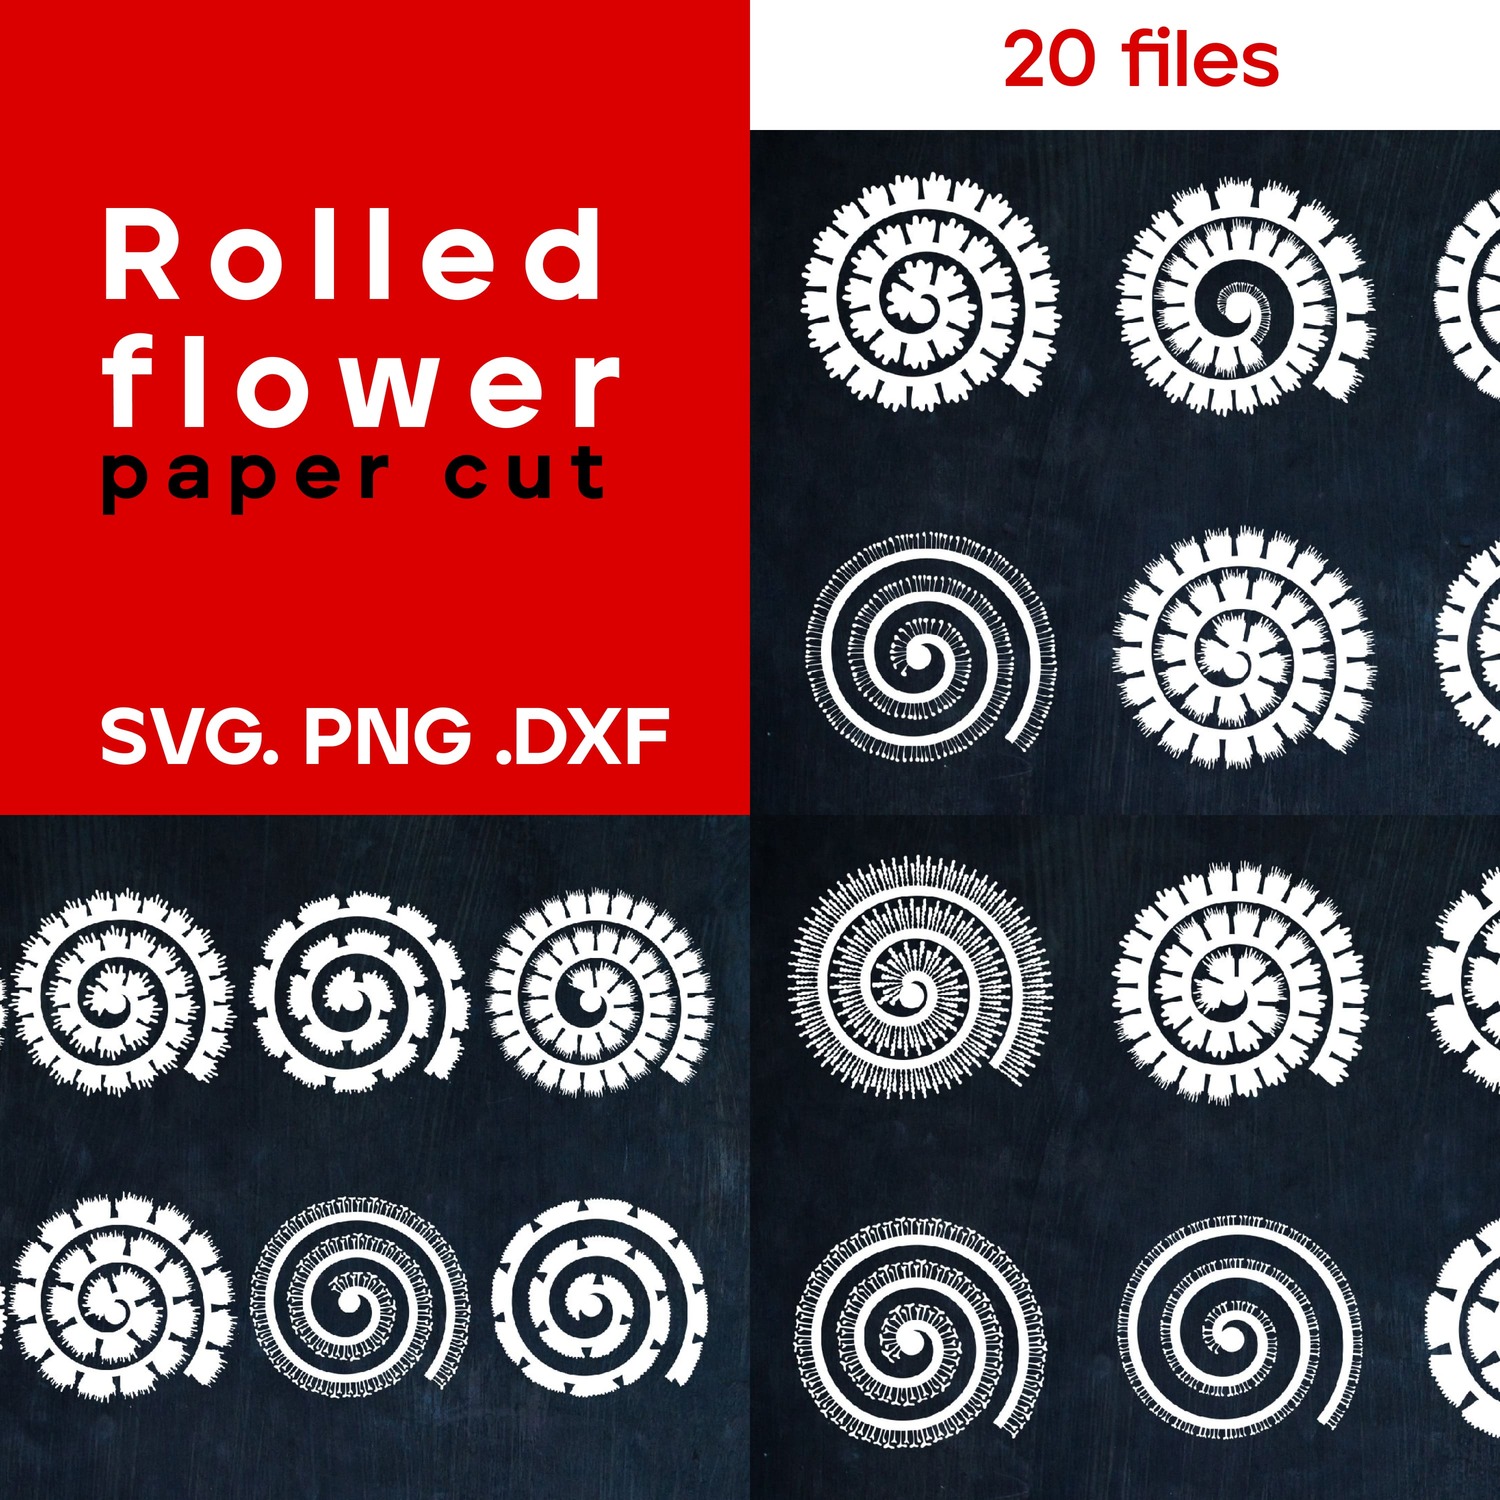 Rolled Flower SVG. Paper Cut cover image.